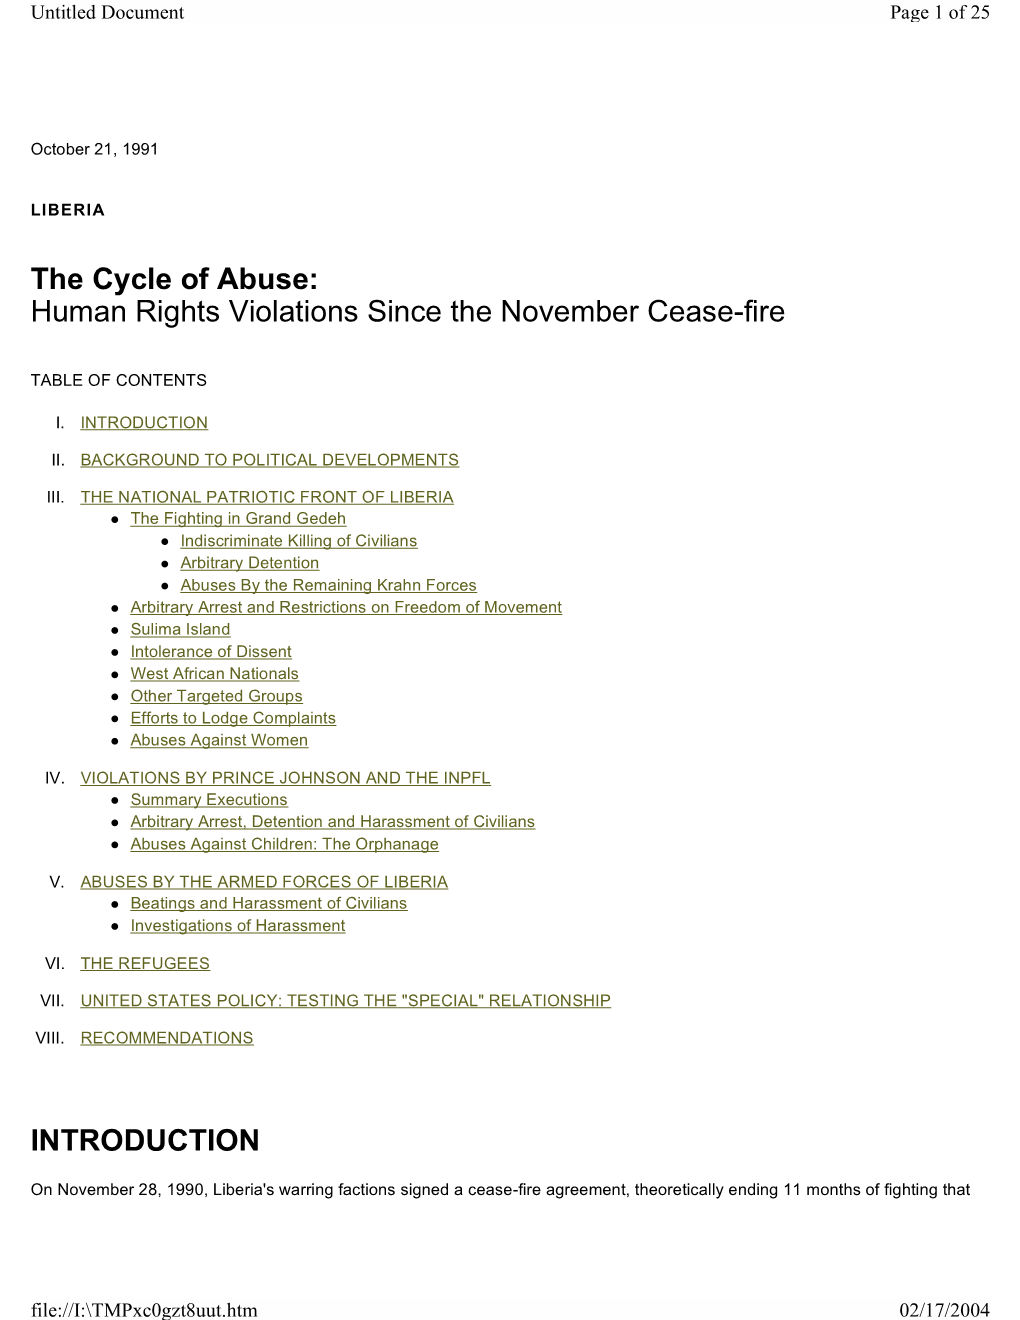 The Cycle of Abuse: Human Rights Violations Since the November Cease-Fire